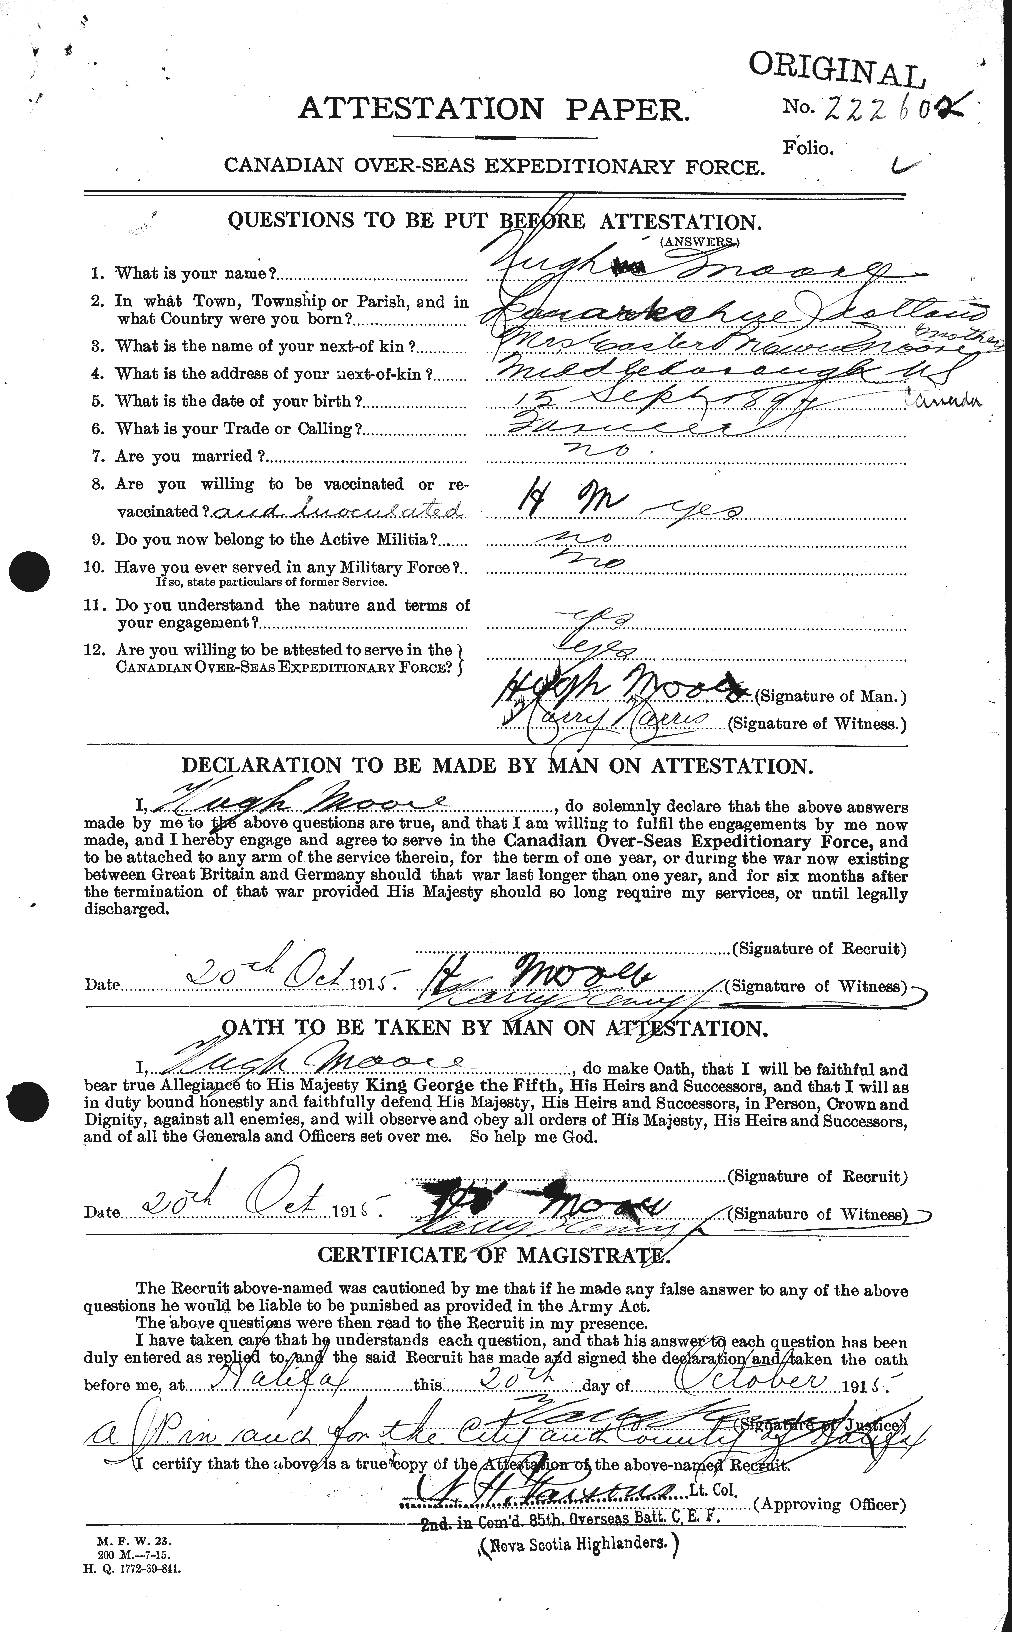 Personnel Records of the First World War - CEF 502142a